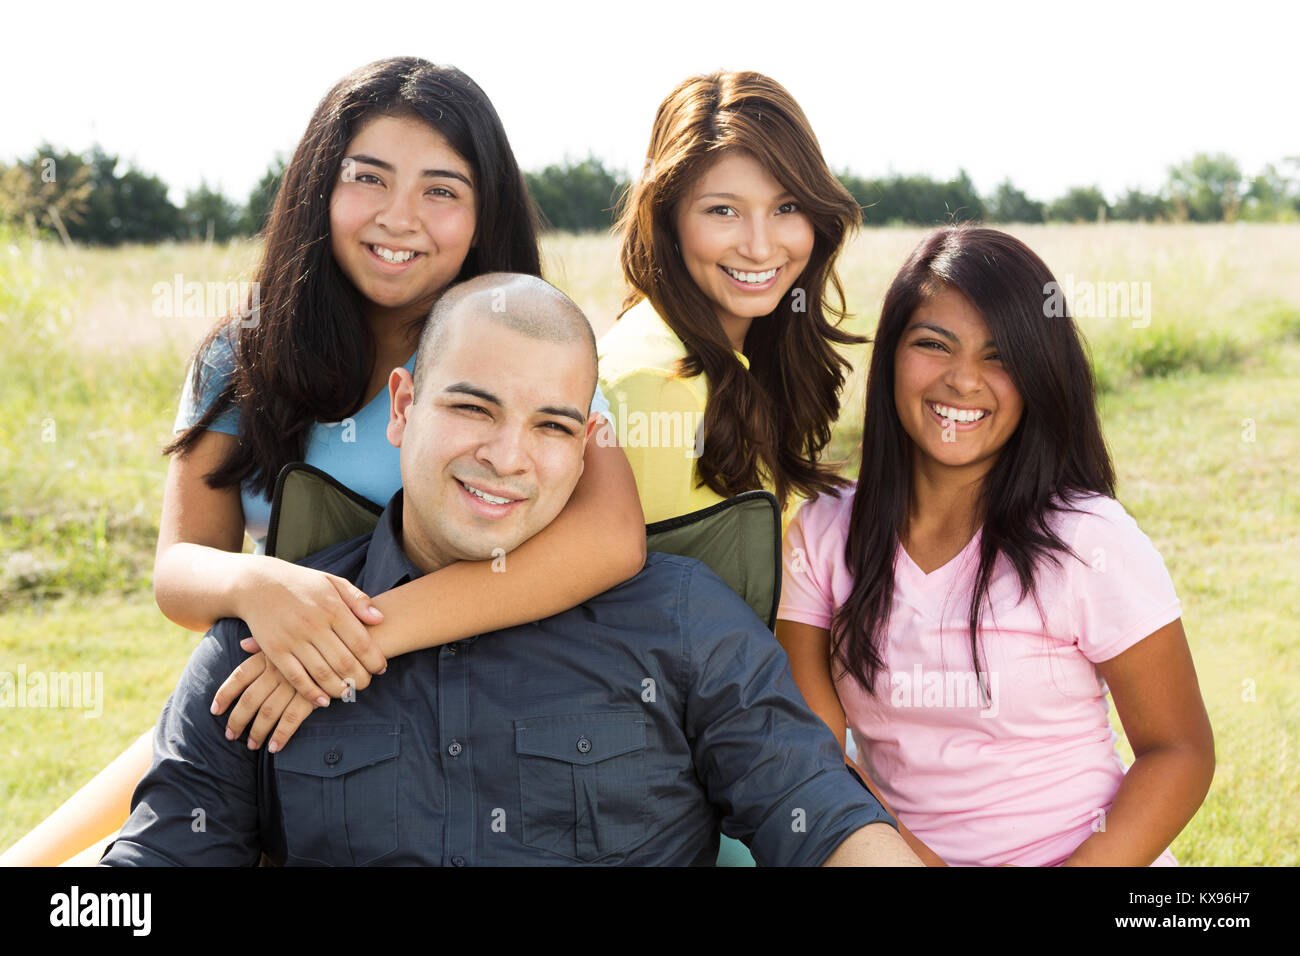 Hispanic father and his daughters. Stock Photo